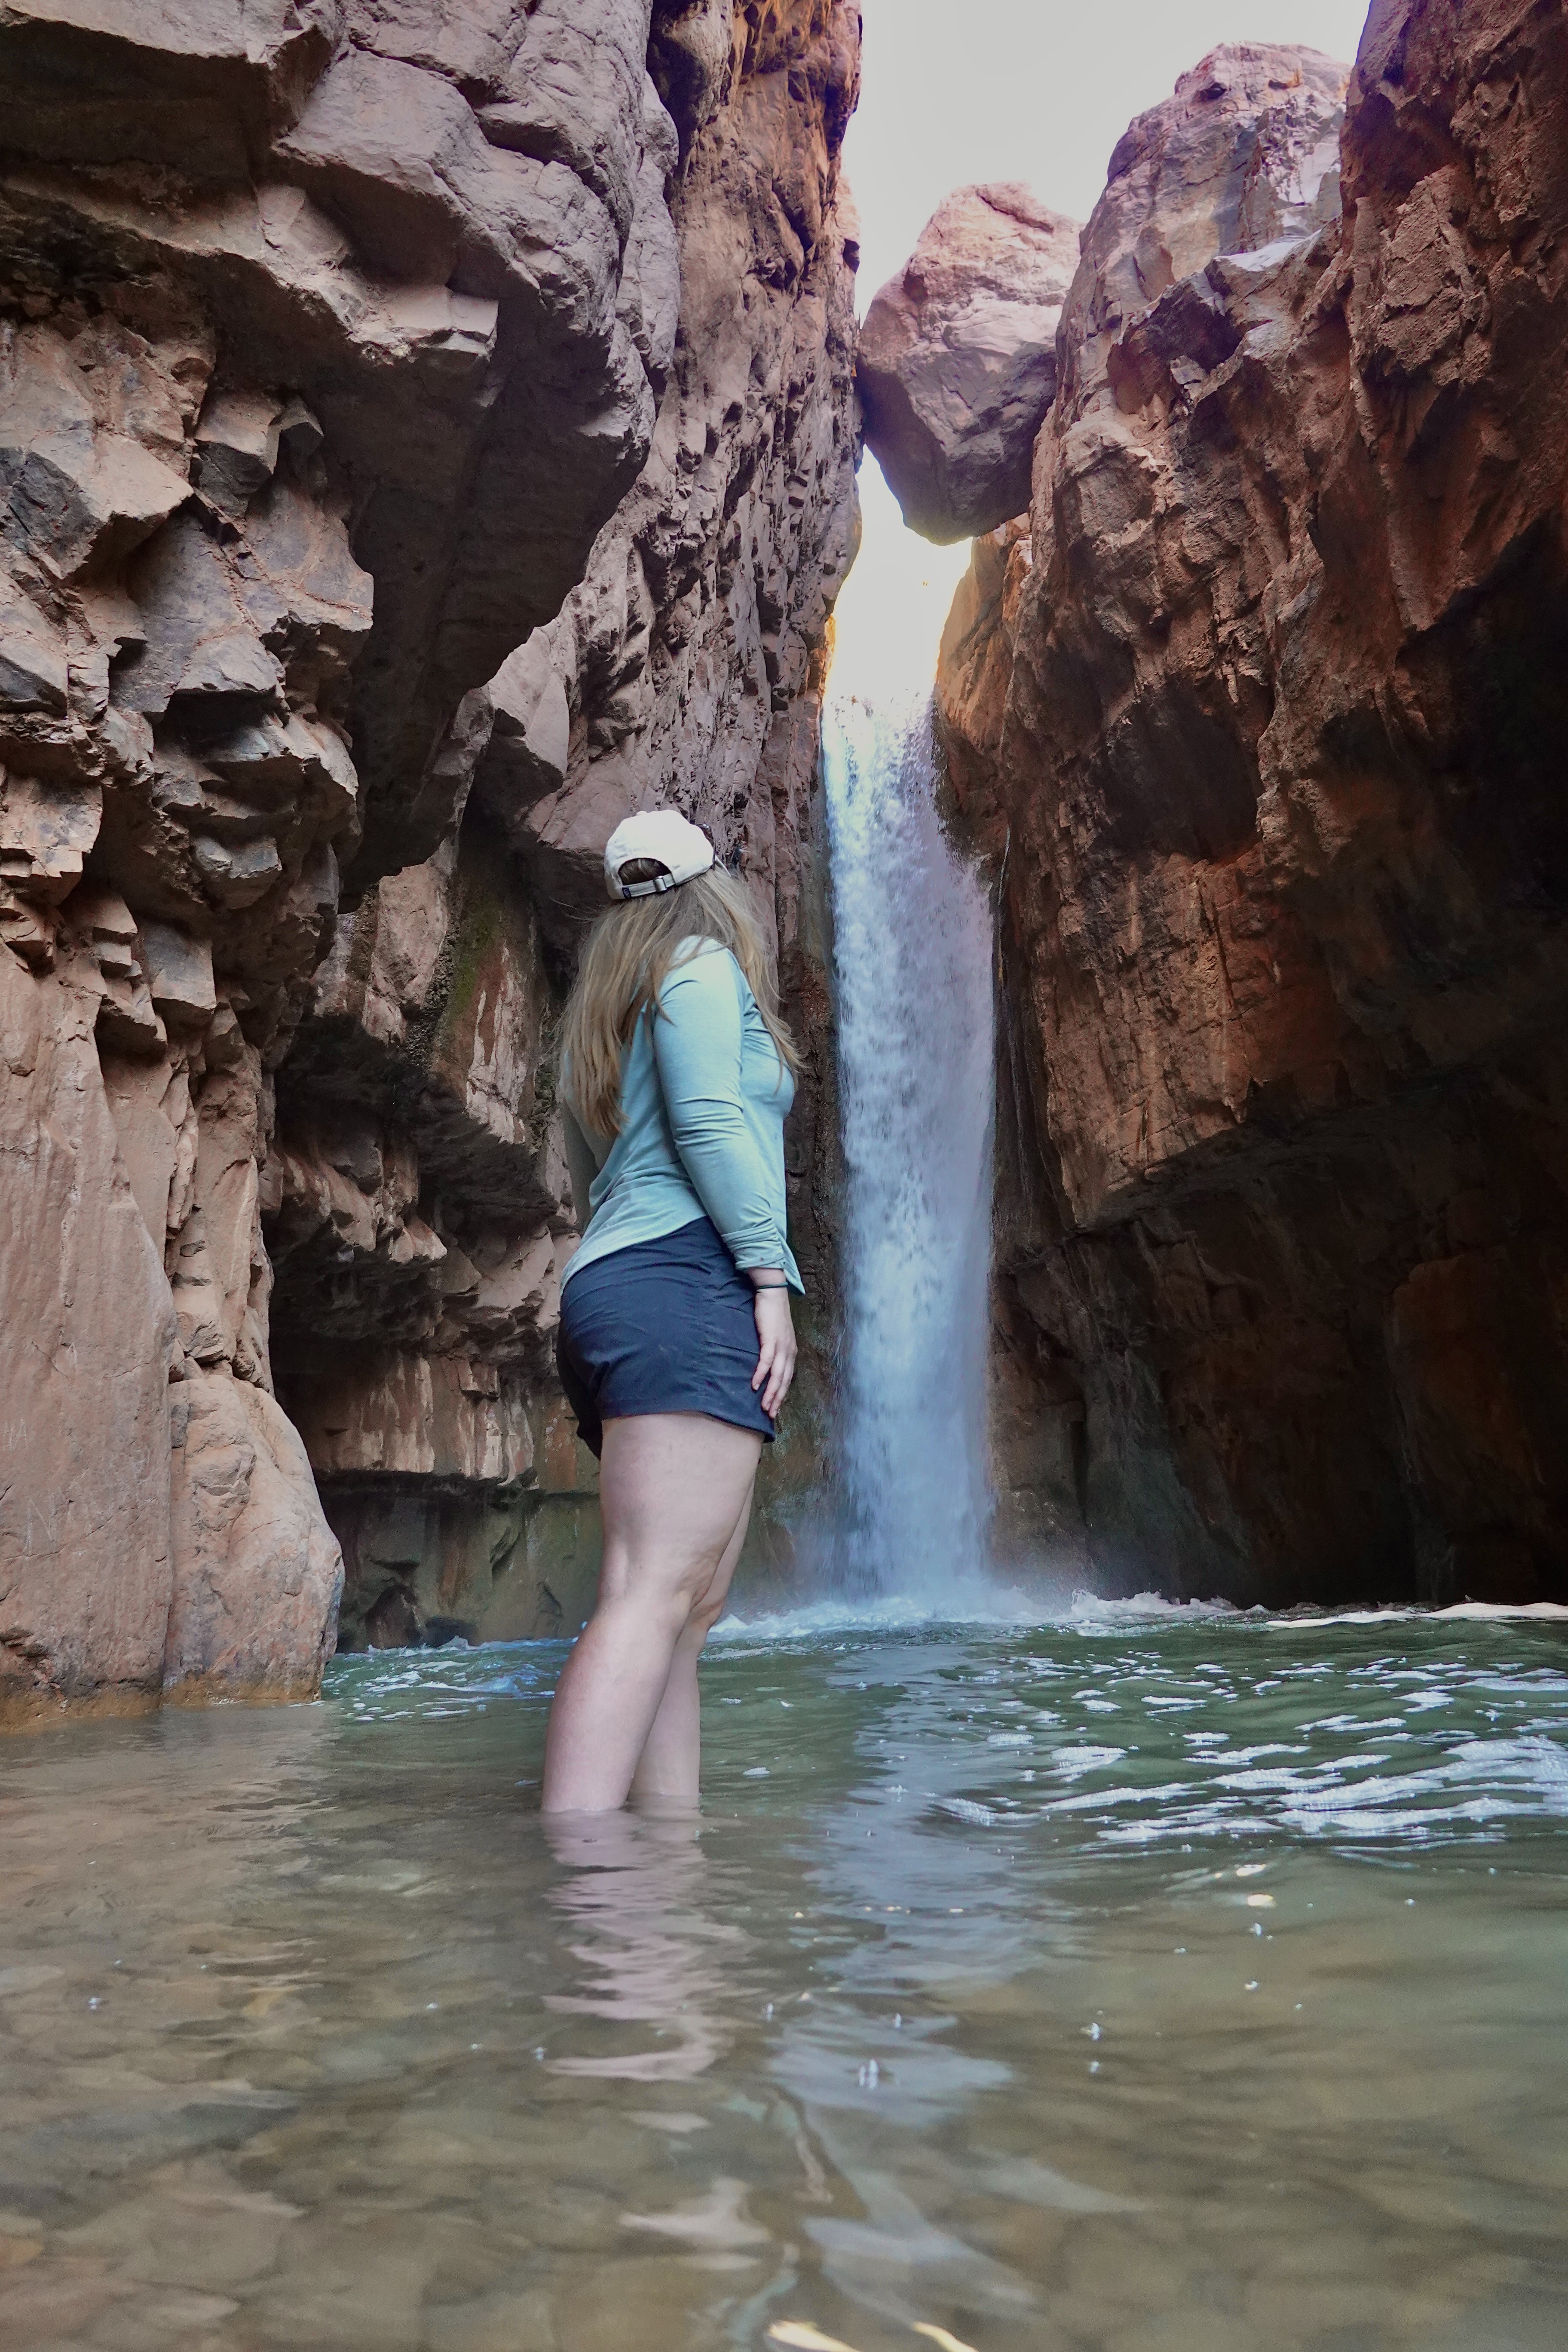 Girl Standing in the Water by a Waterfall